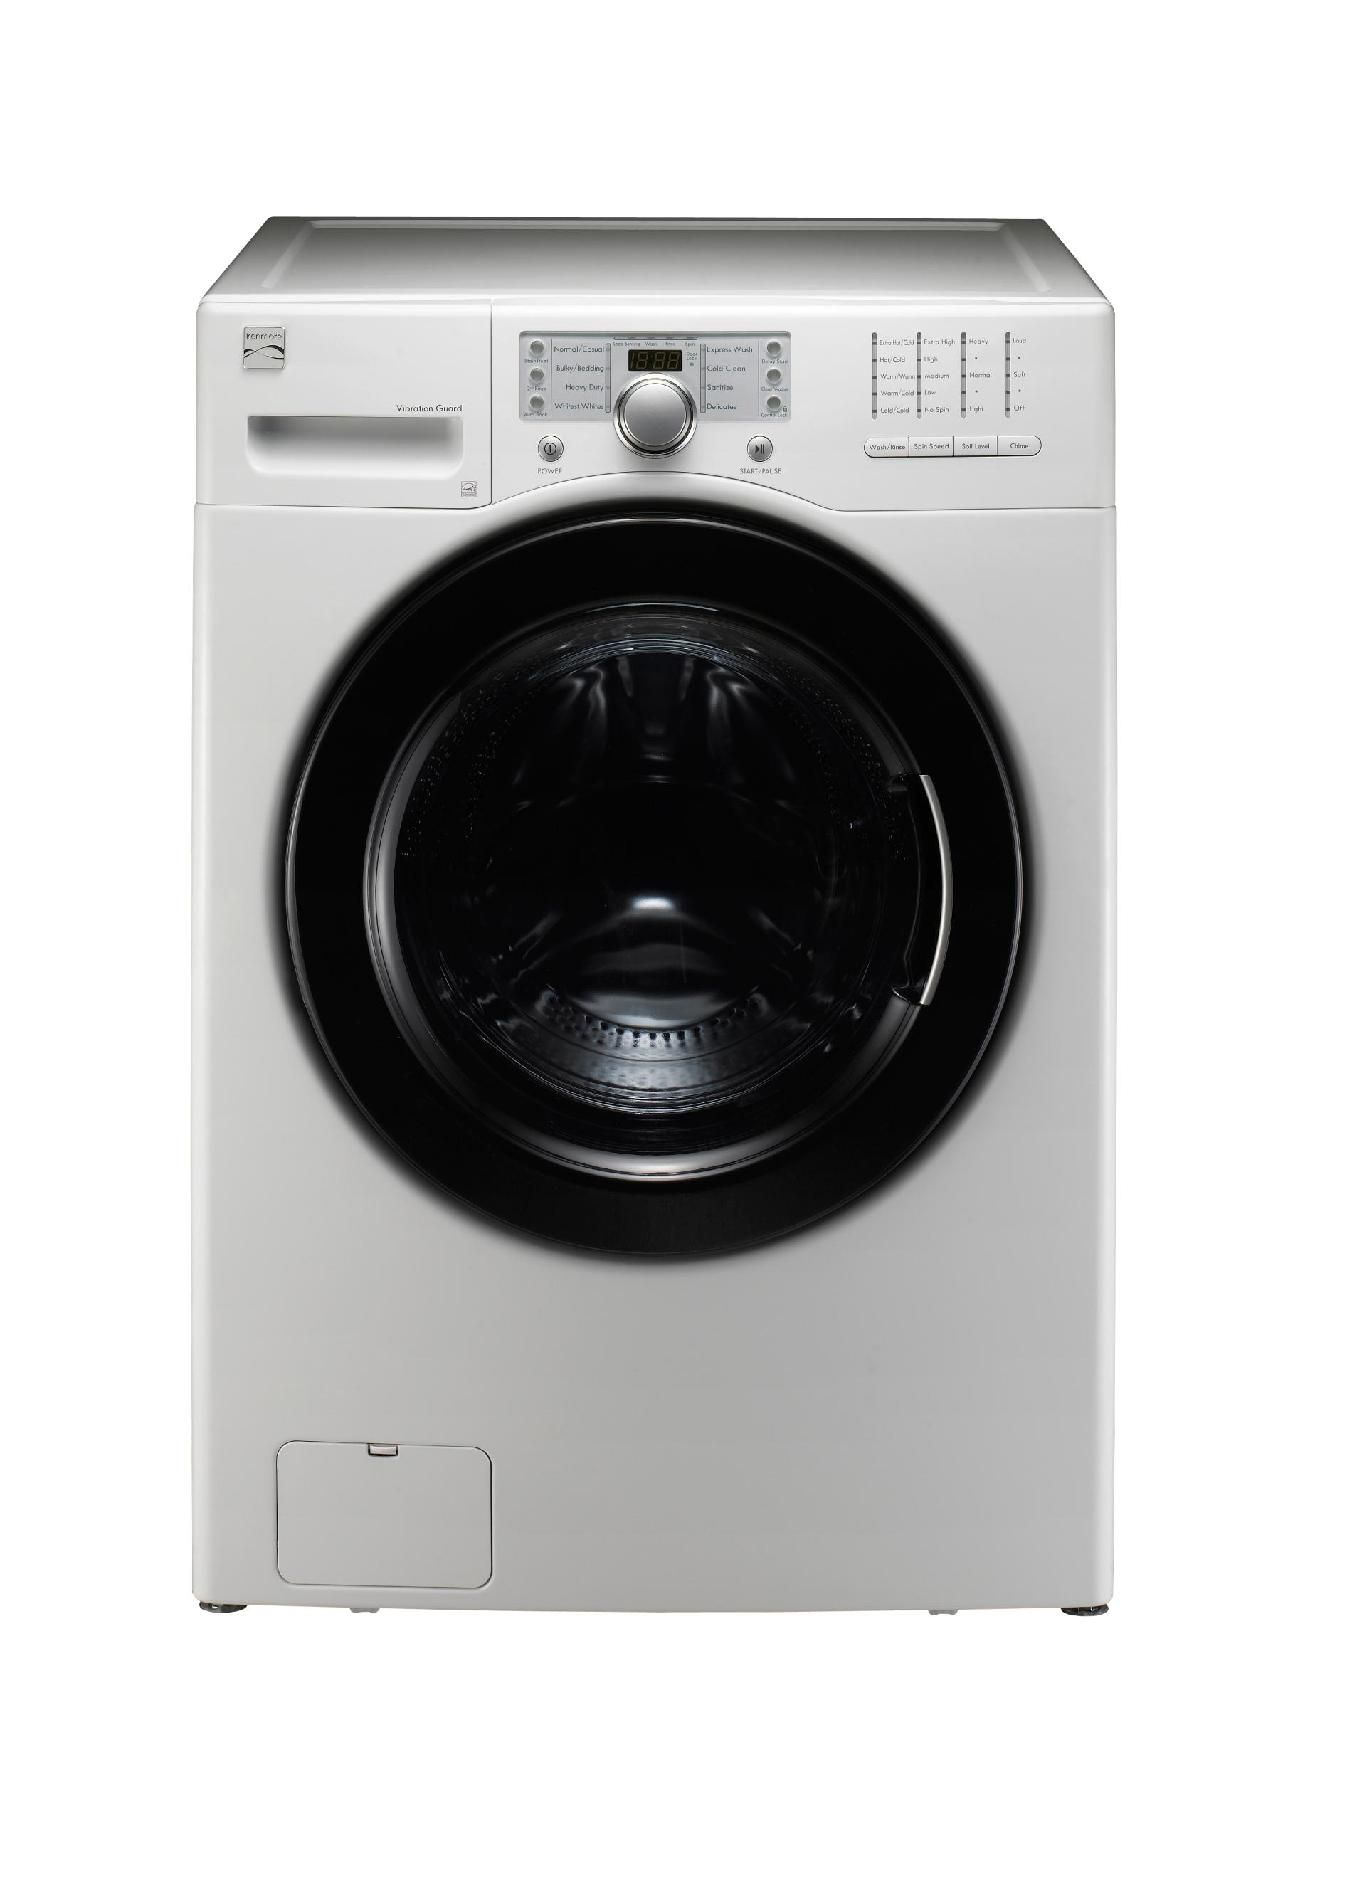 Kenmore 3.5 cu. ft. Front-Load Washer, White